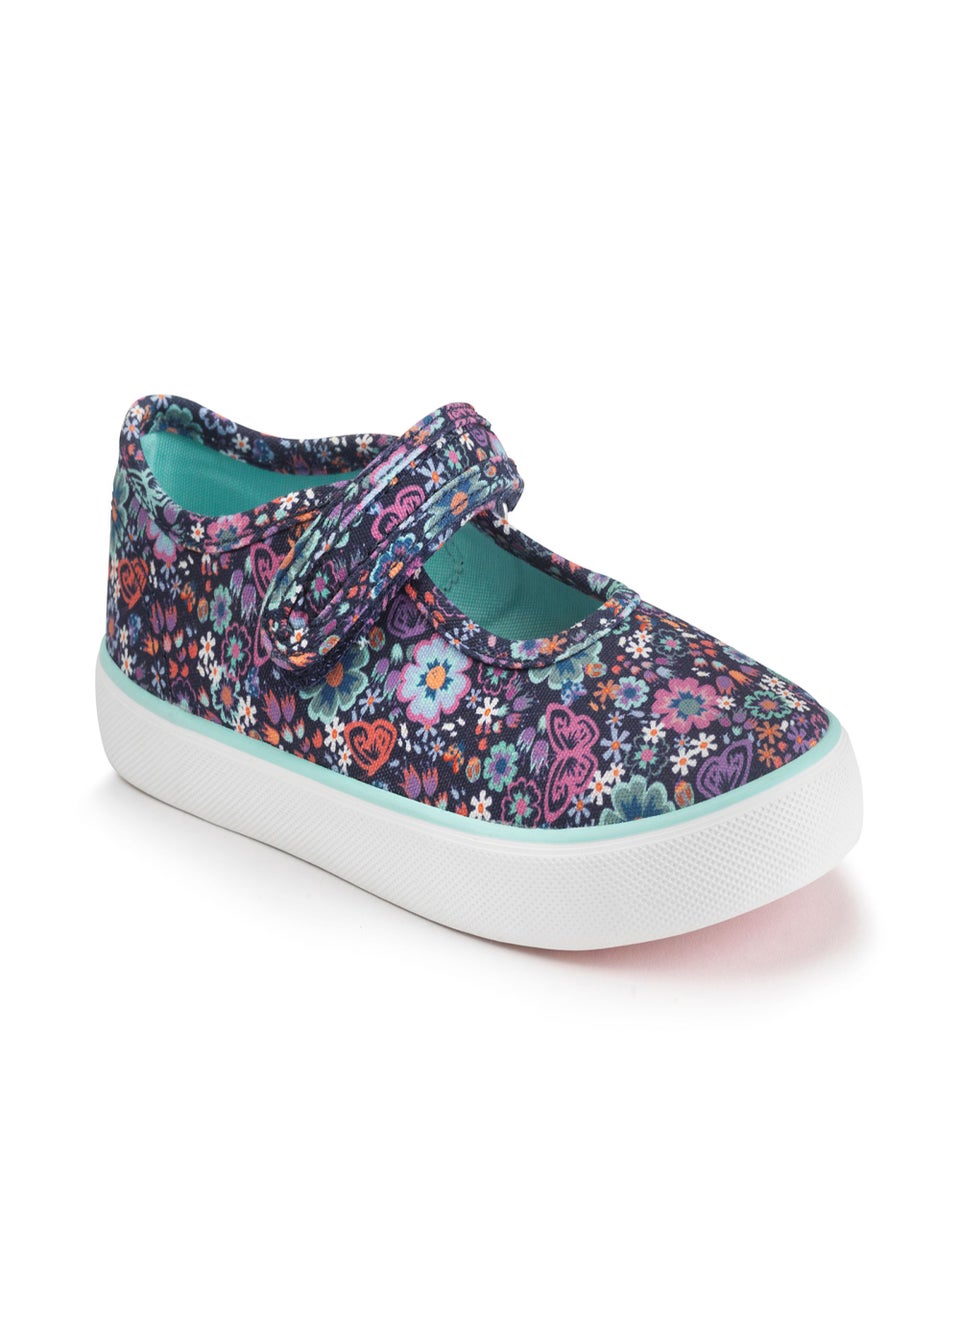 Start-Rite Busy Lizzie Navy Floral Riptape Canvas Shoes